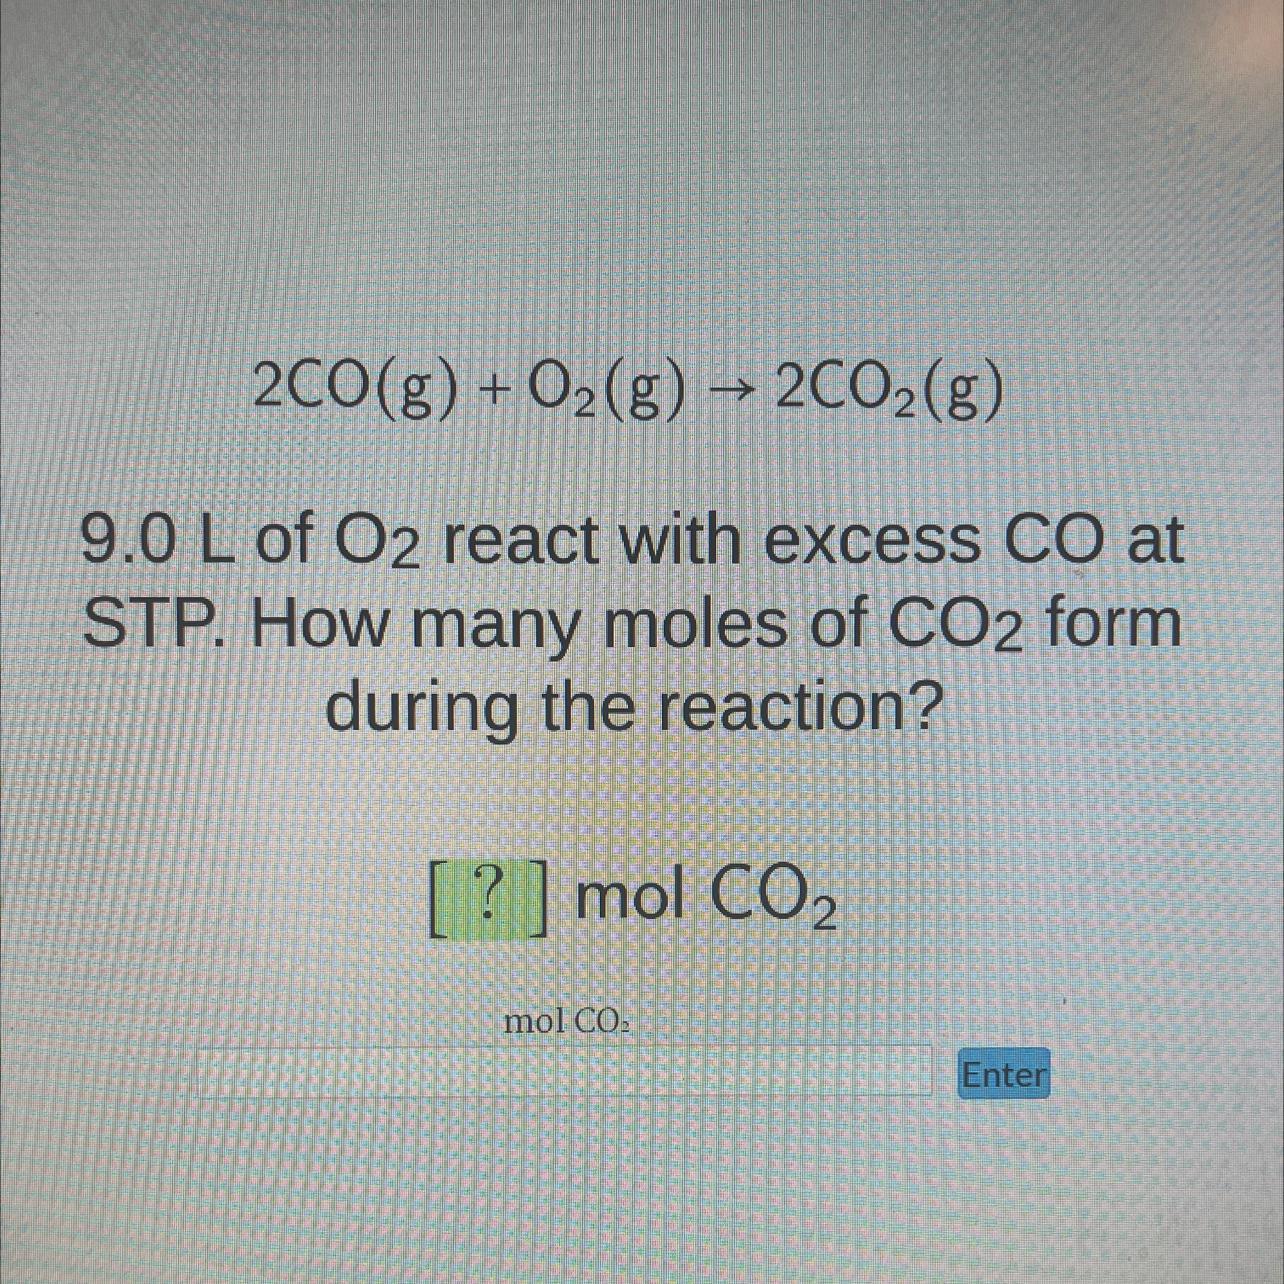 2CO(g) + O(g) 2CO(g)9.0 L Of O2 React With Excess CO AtSTP. How Many Moles Of CO2 Formduring The Reaction?[?]